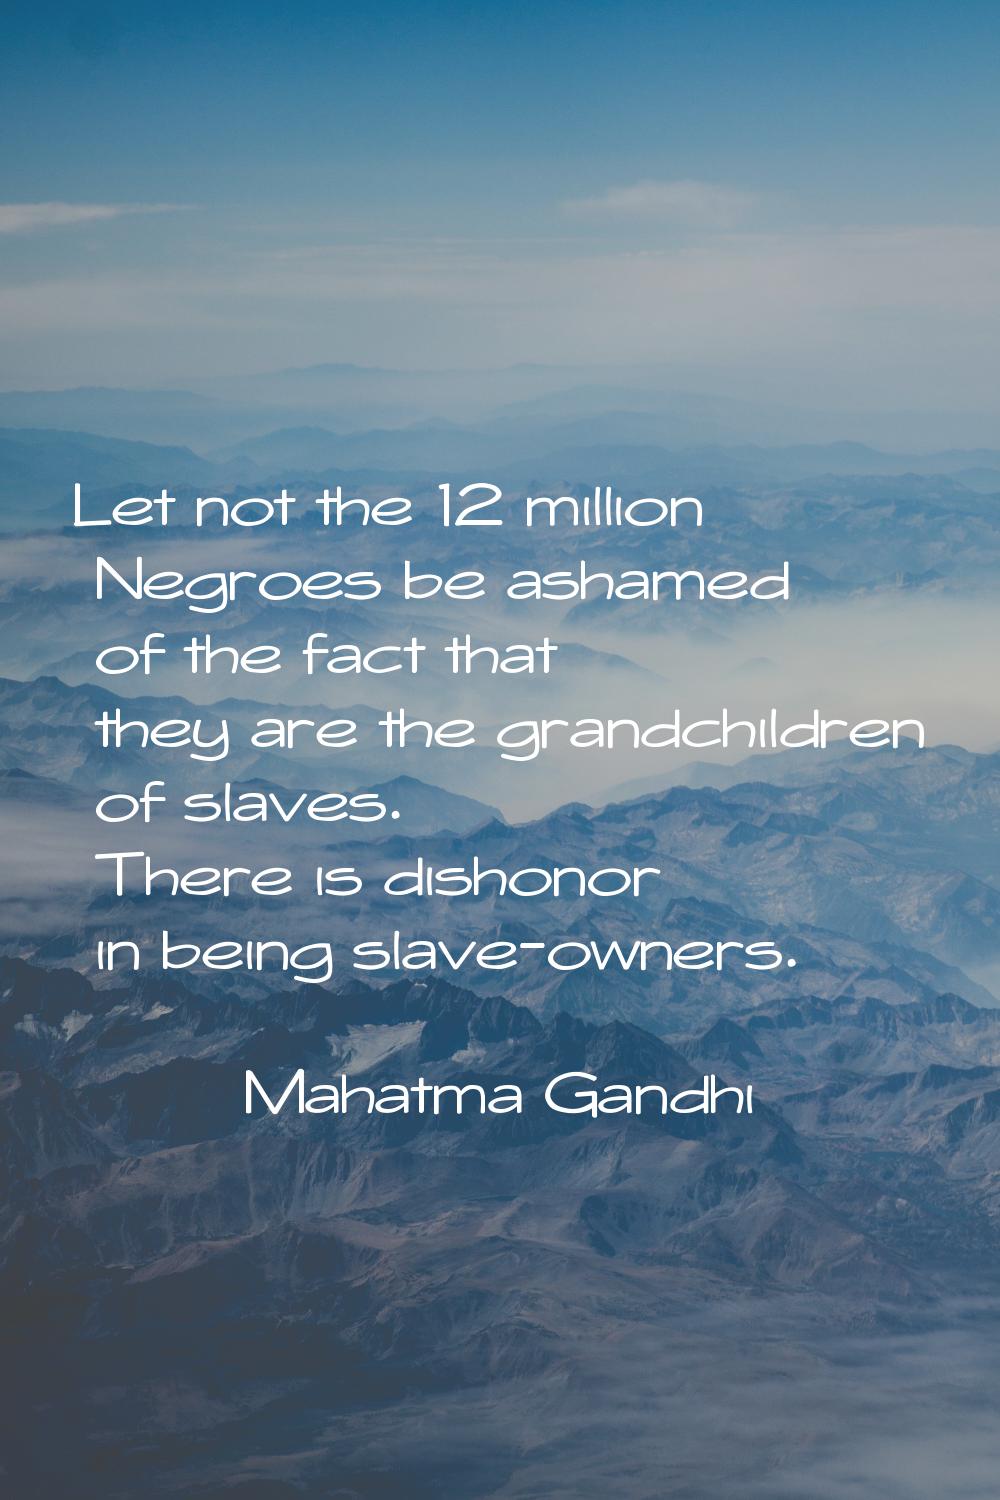 Let not the 12 million Negroes be ashamed of the fact that they are the grandchildren of slaves. Th